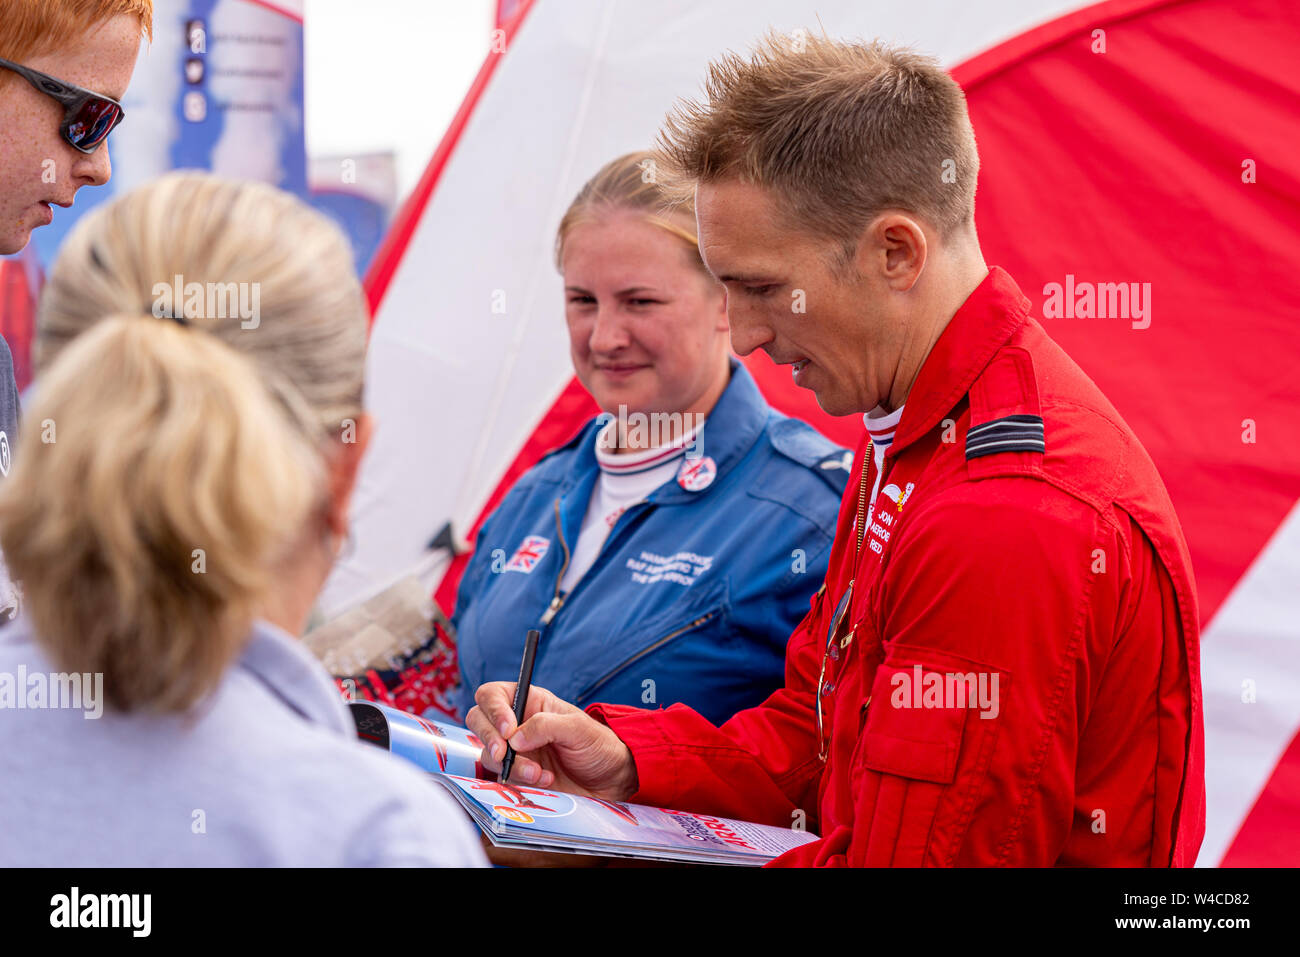 Flt Lt Jon Bond Red Arrows pilot signing autographs and meeting fans at Royal International Air Tattoo airshow, Cotswolds, UK. RAF display team Stock Photo